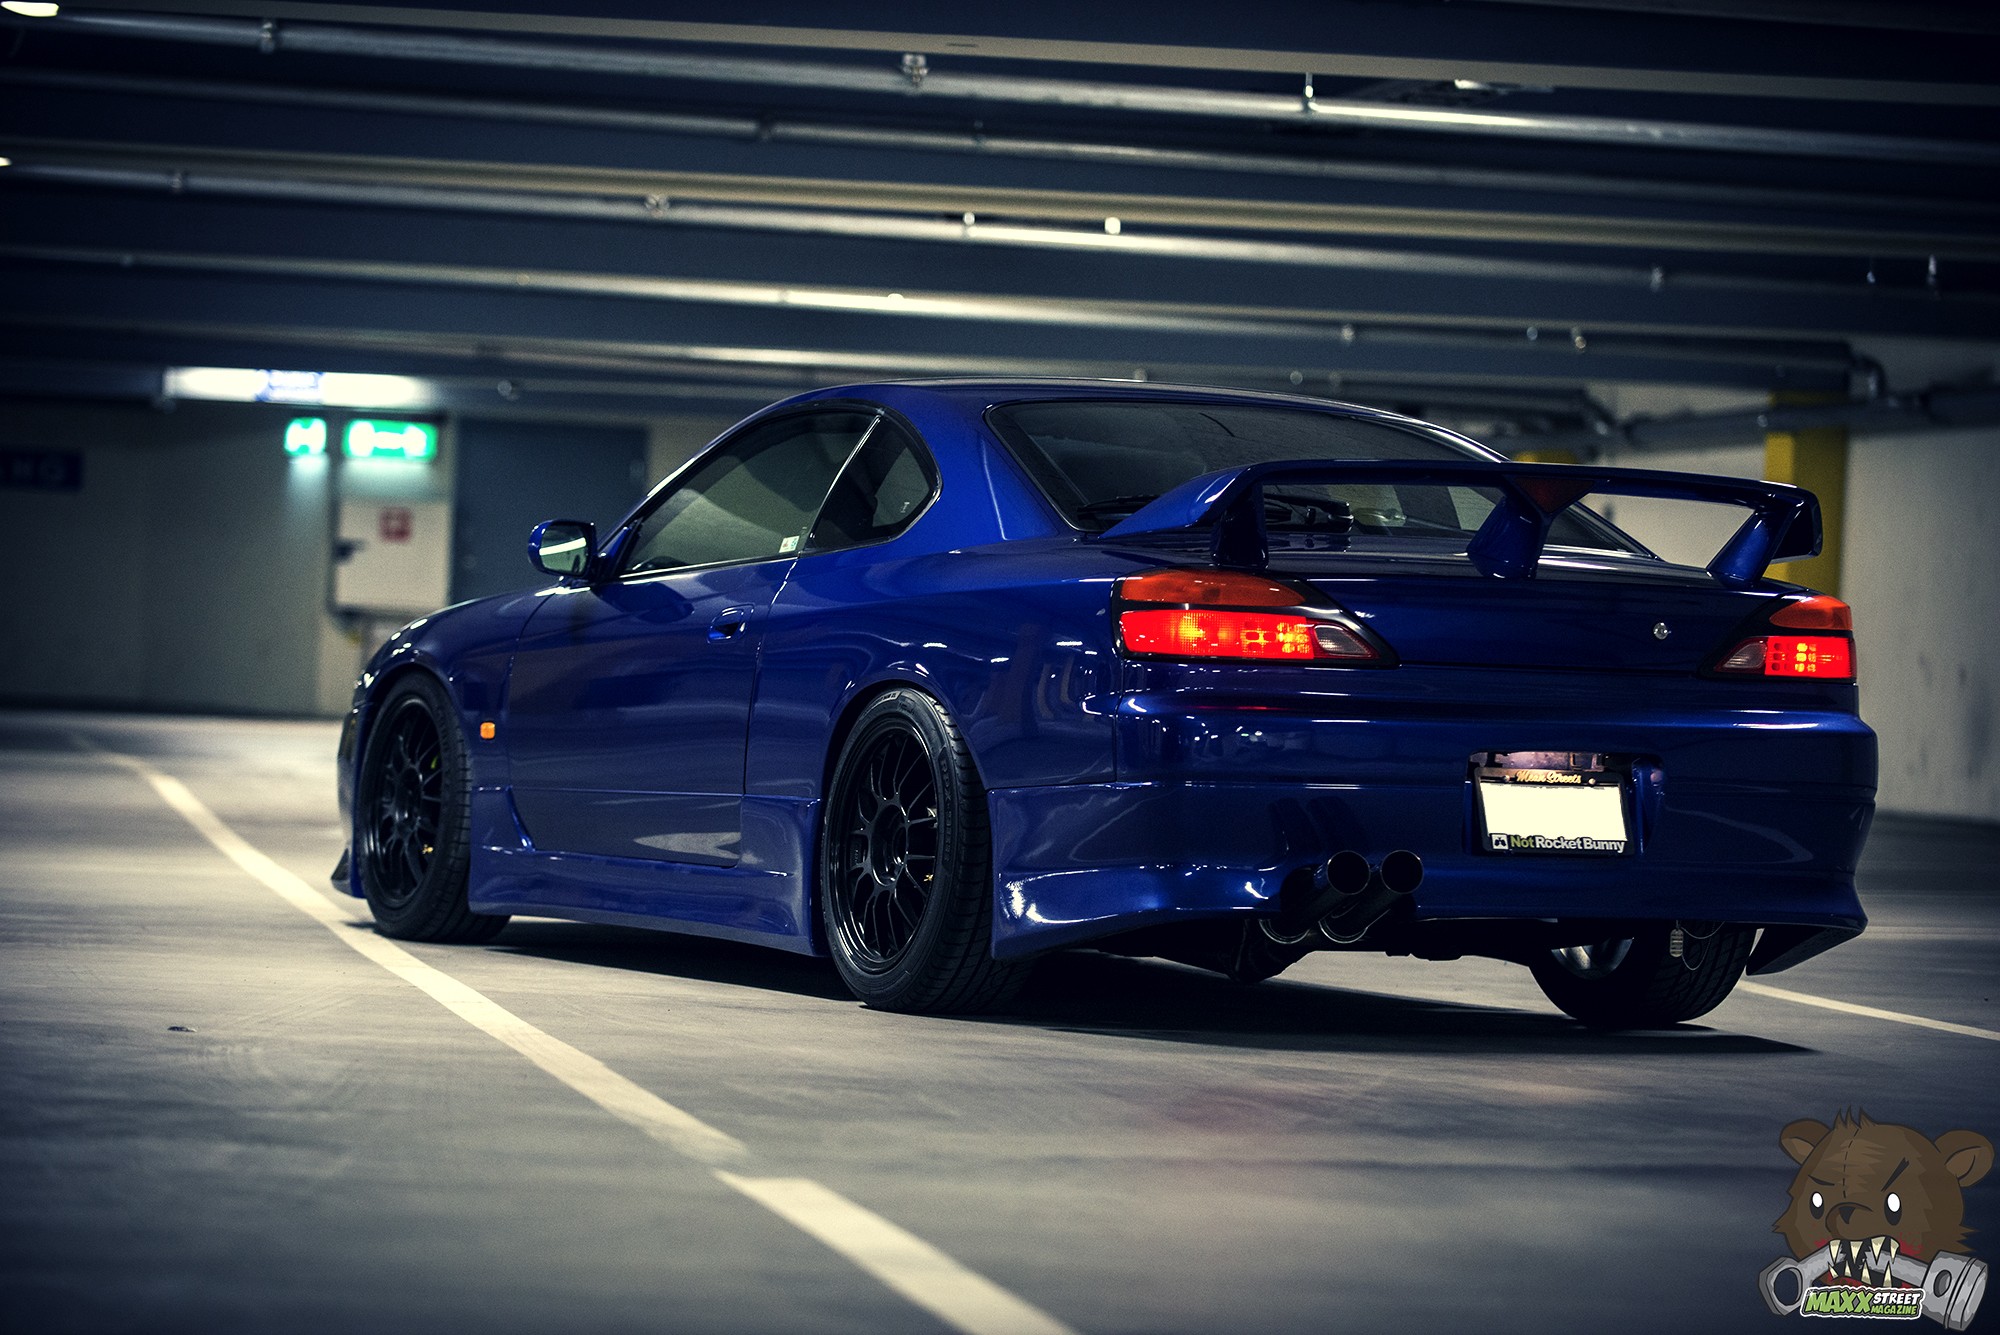 General 2000x1335 Nissan Silvia Spec-R Nissan Silvia S15 Japanese cars car blue cars vehicle watermarked Nissan